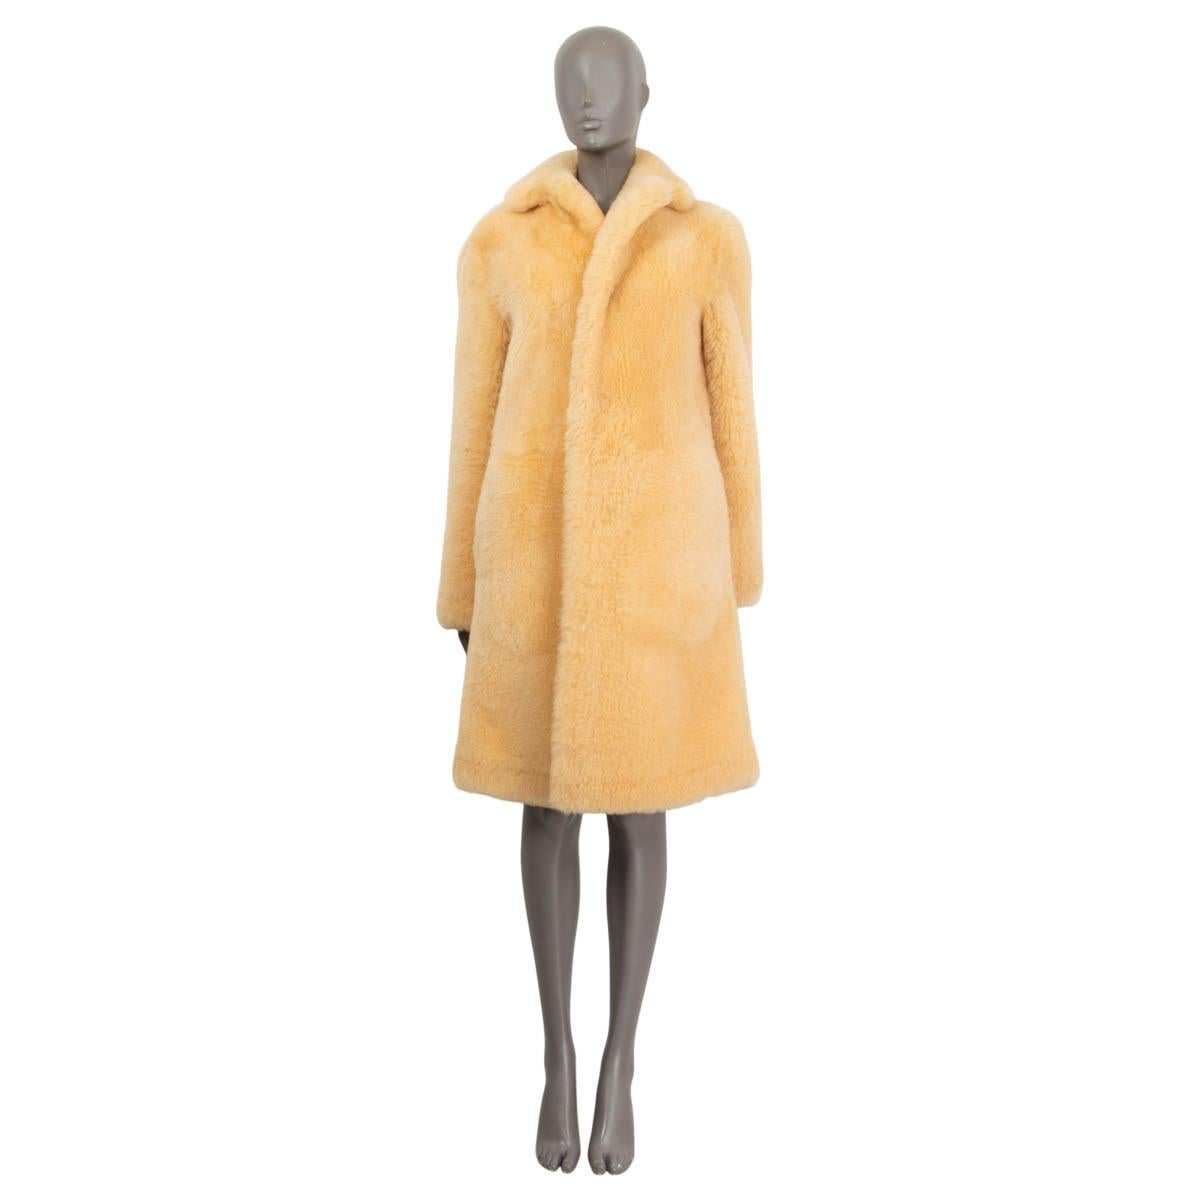 100% authentic Bottega Veneta long coat in light yellow lamb shearling (100%). Features a notch collar and two slit pockets on the front. Opens with three push buttons on the front. Unlined. Has been worn once and is in virtually new condition.